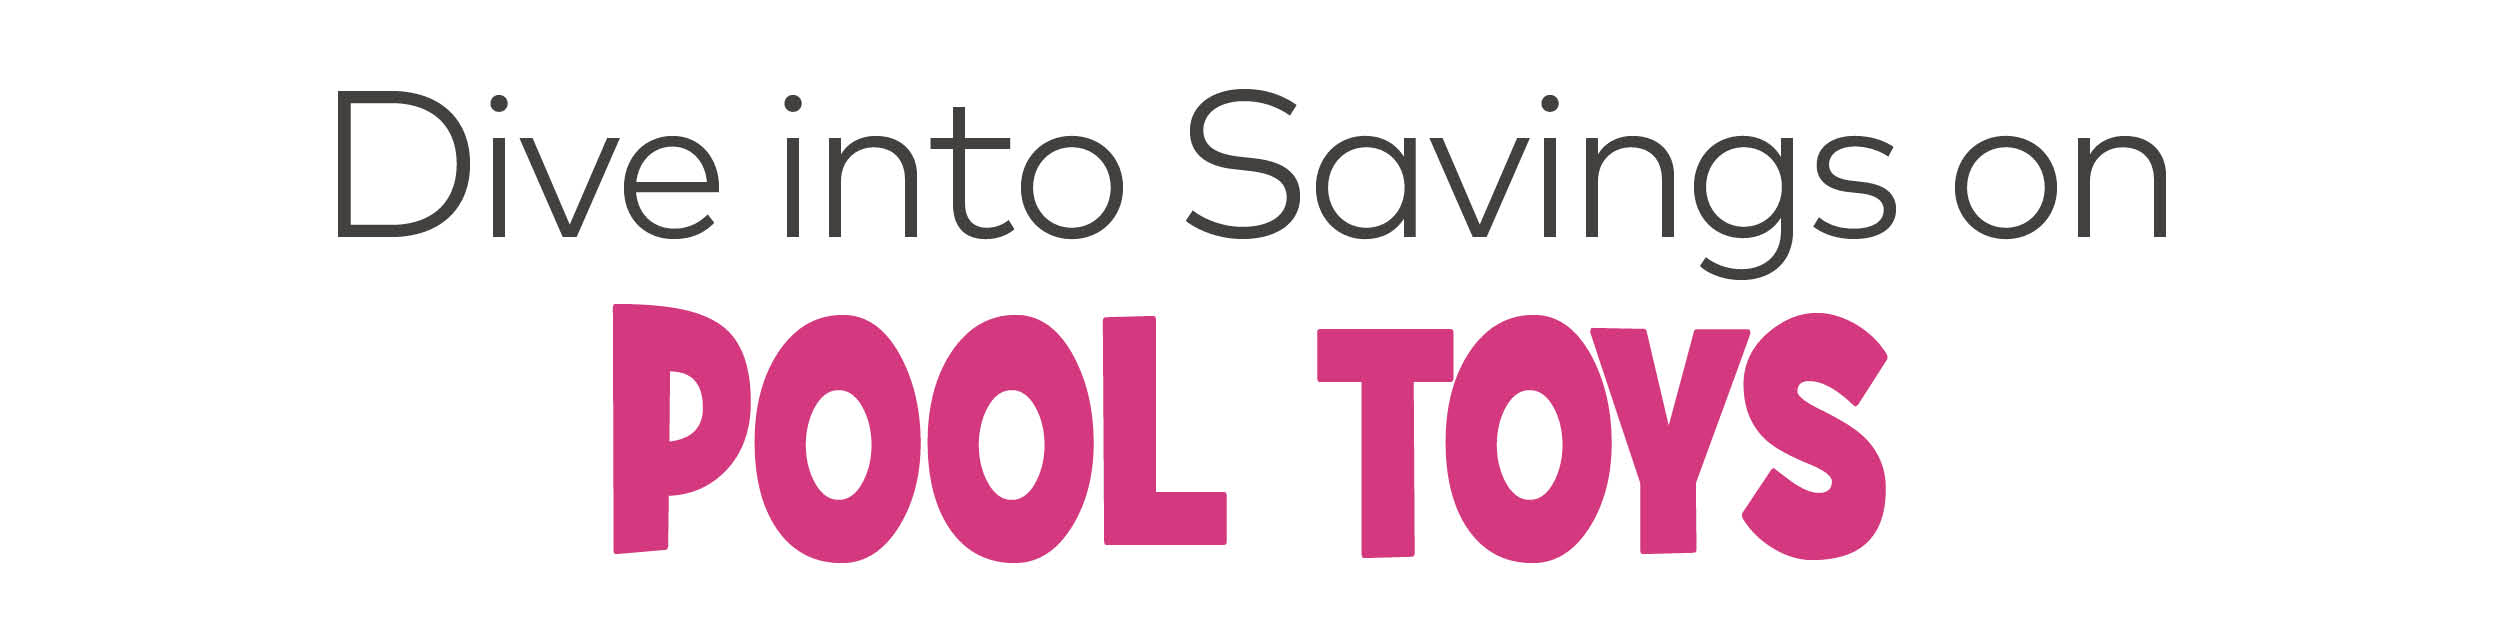 Dive into Savings on Pool Toys